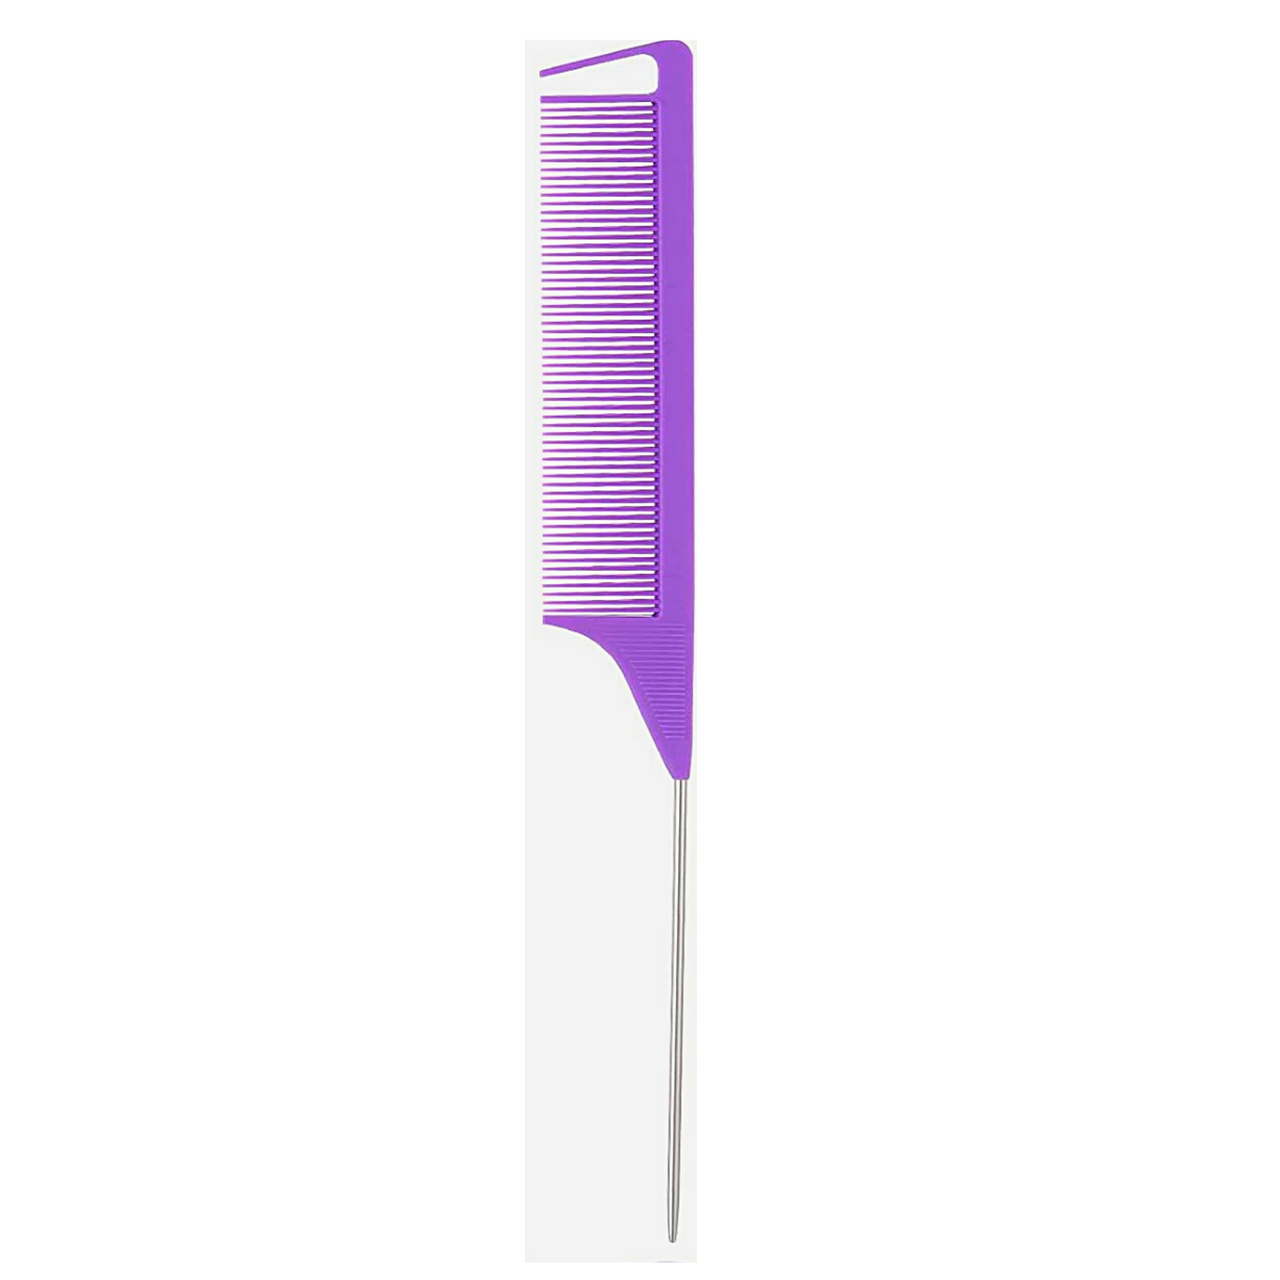 Parting Comb for Braids Rat Tail Styling Comb with Stainless Stele Pintail  [Purple] - Royal Moroccan